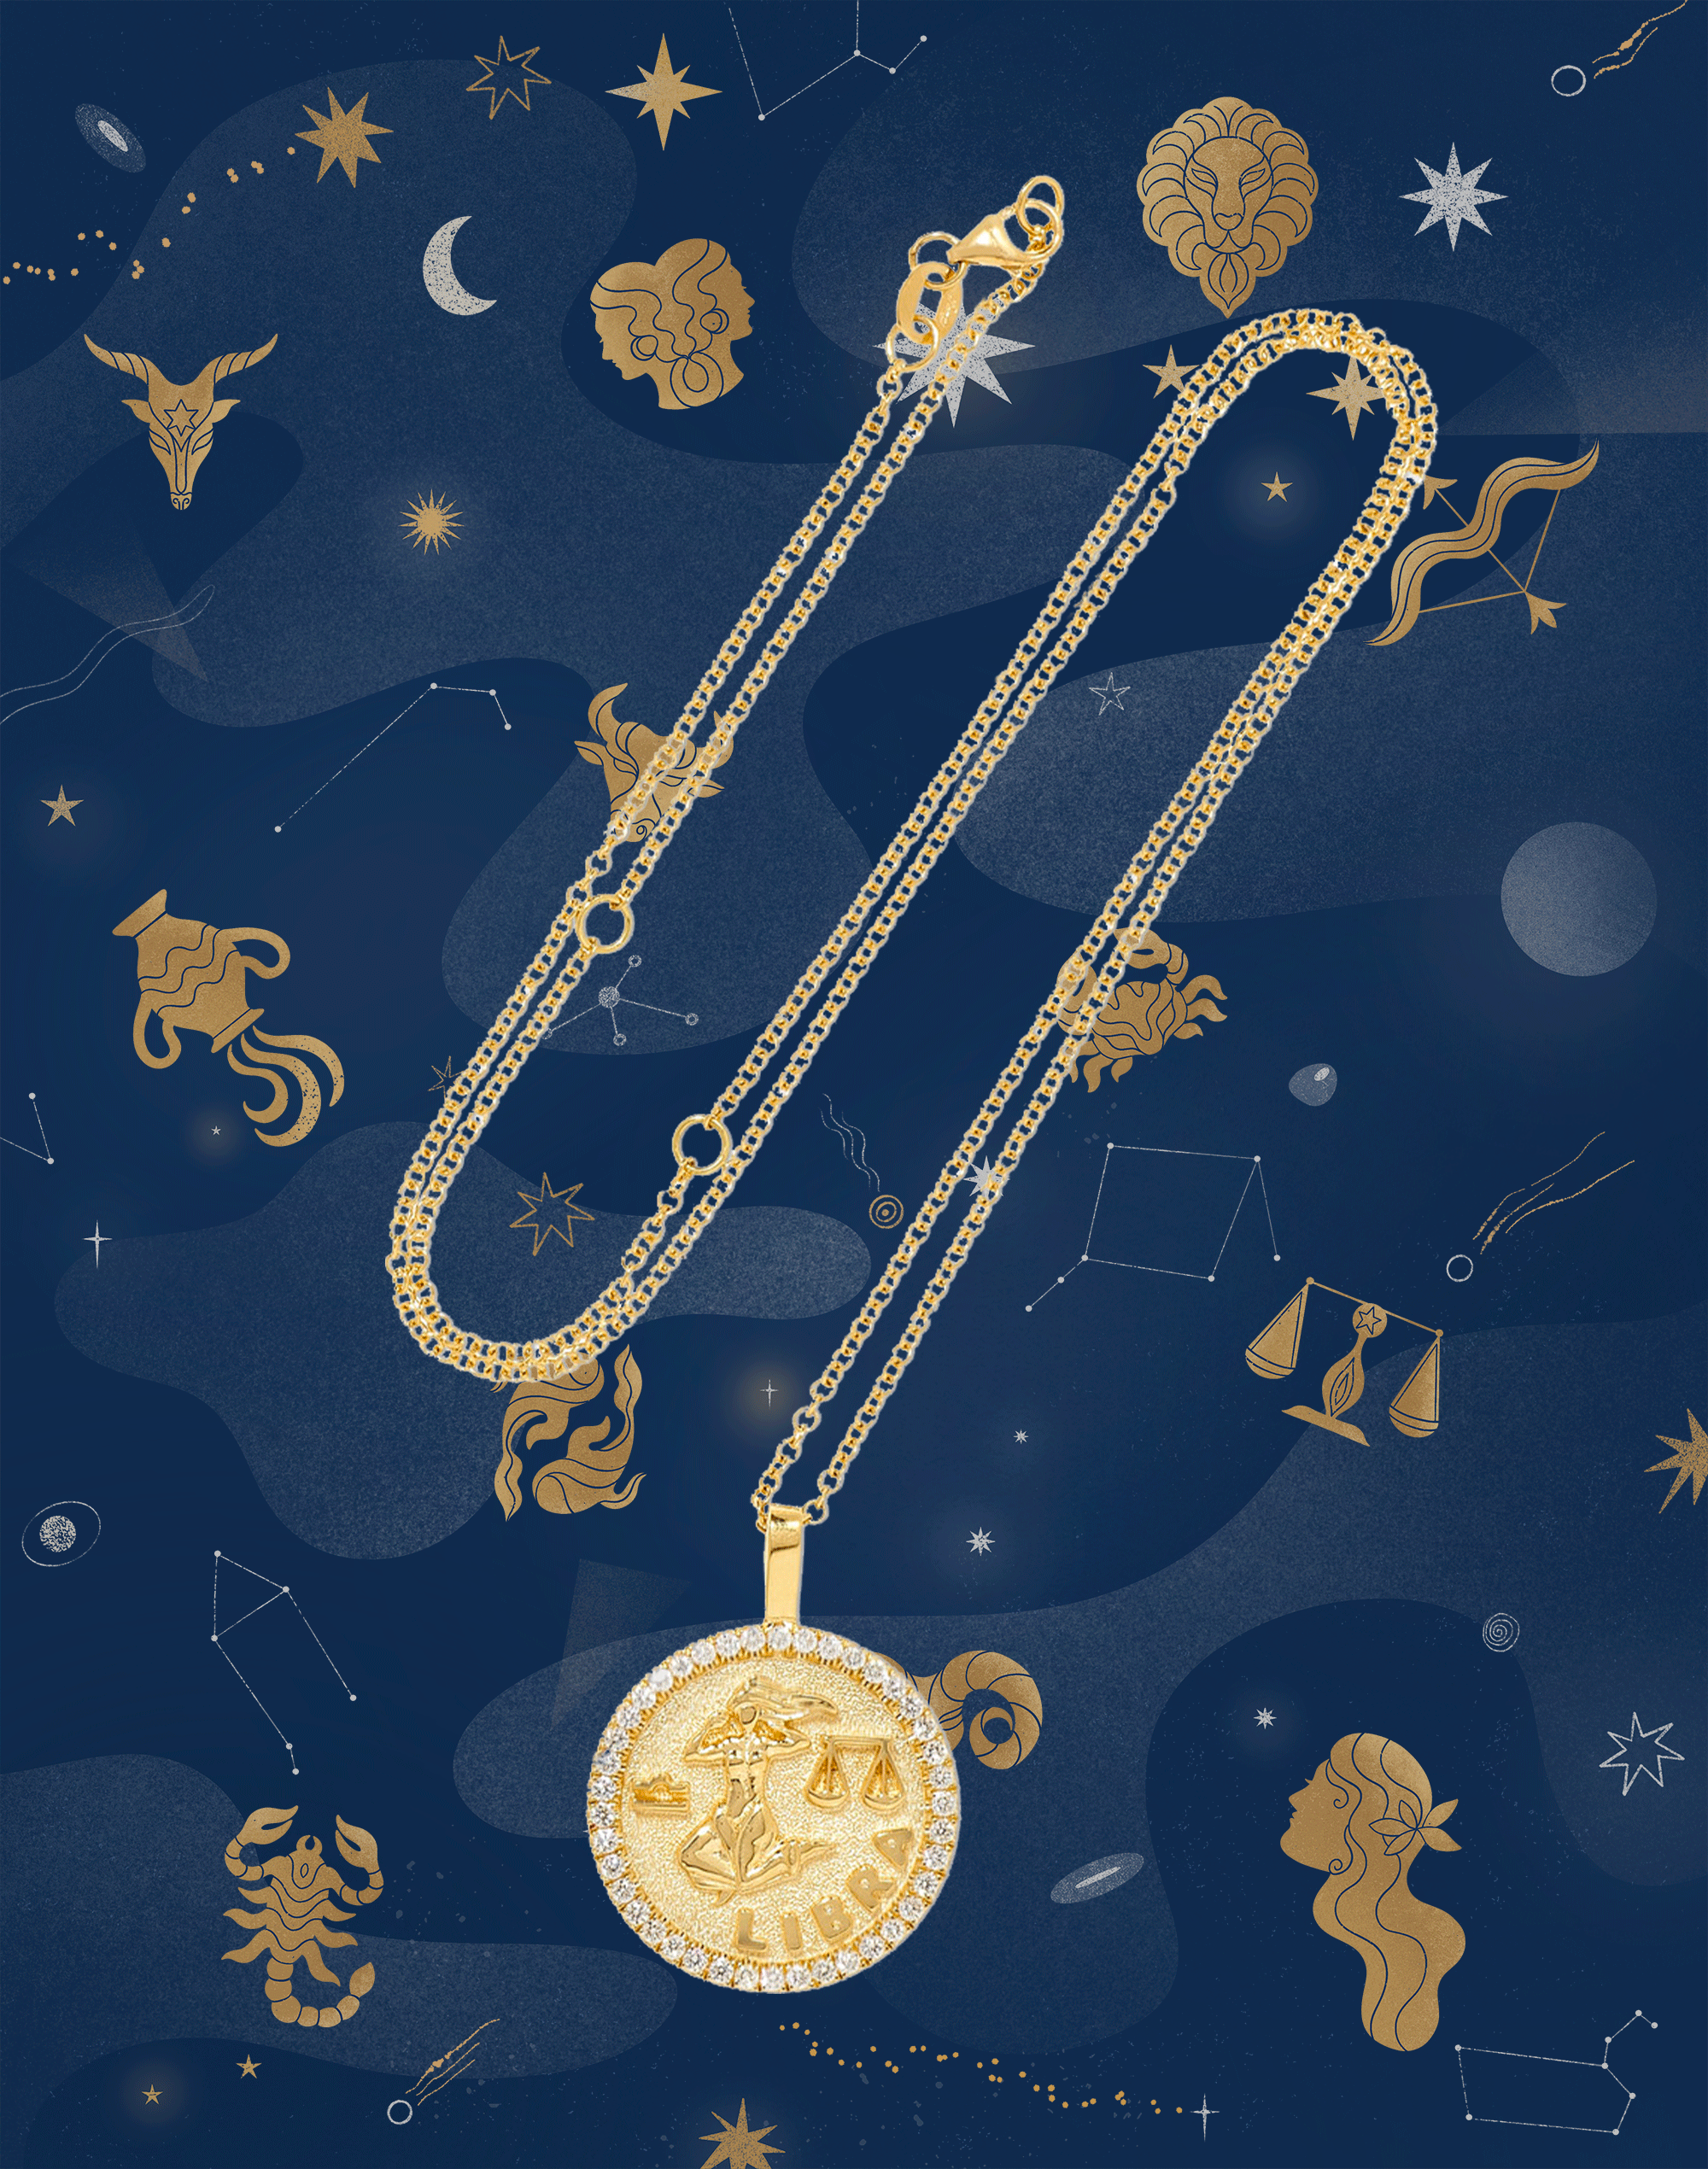 Plated in Gold Neckalce - Ella Zodiac Sign Necklace by Talisa